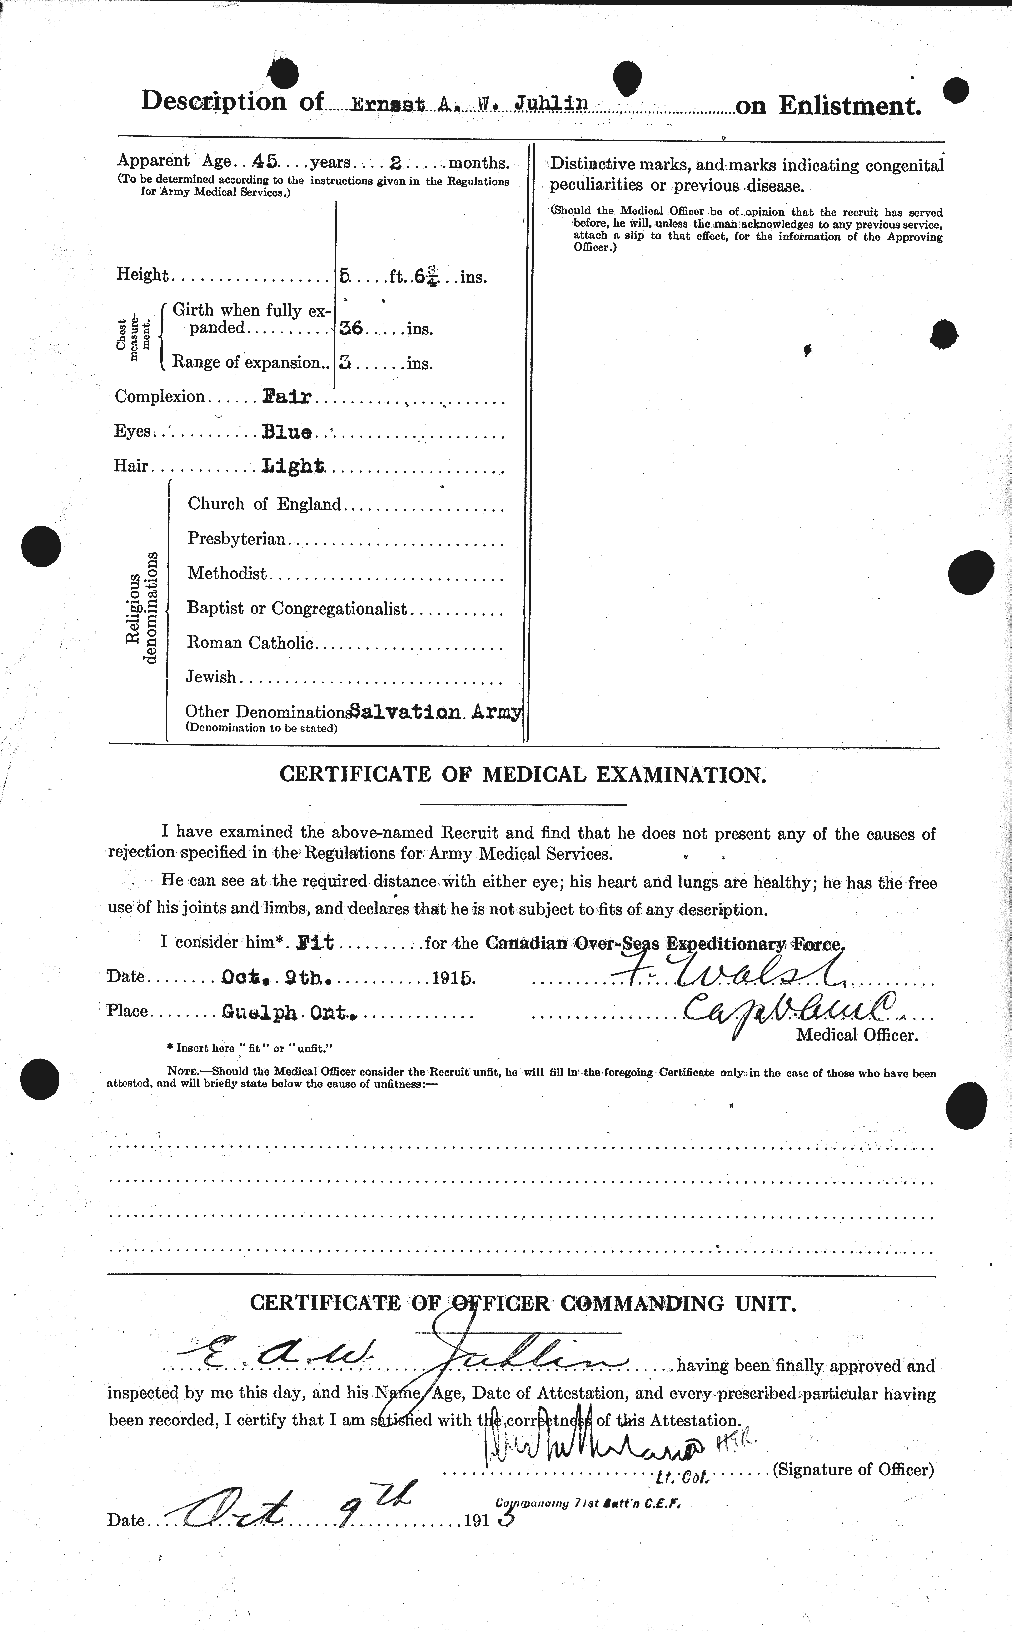 Personnel Records of the First World War - CEF 425098b